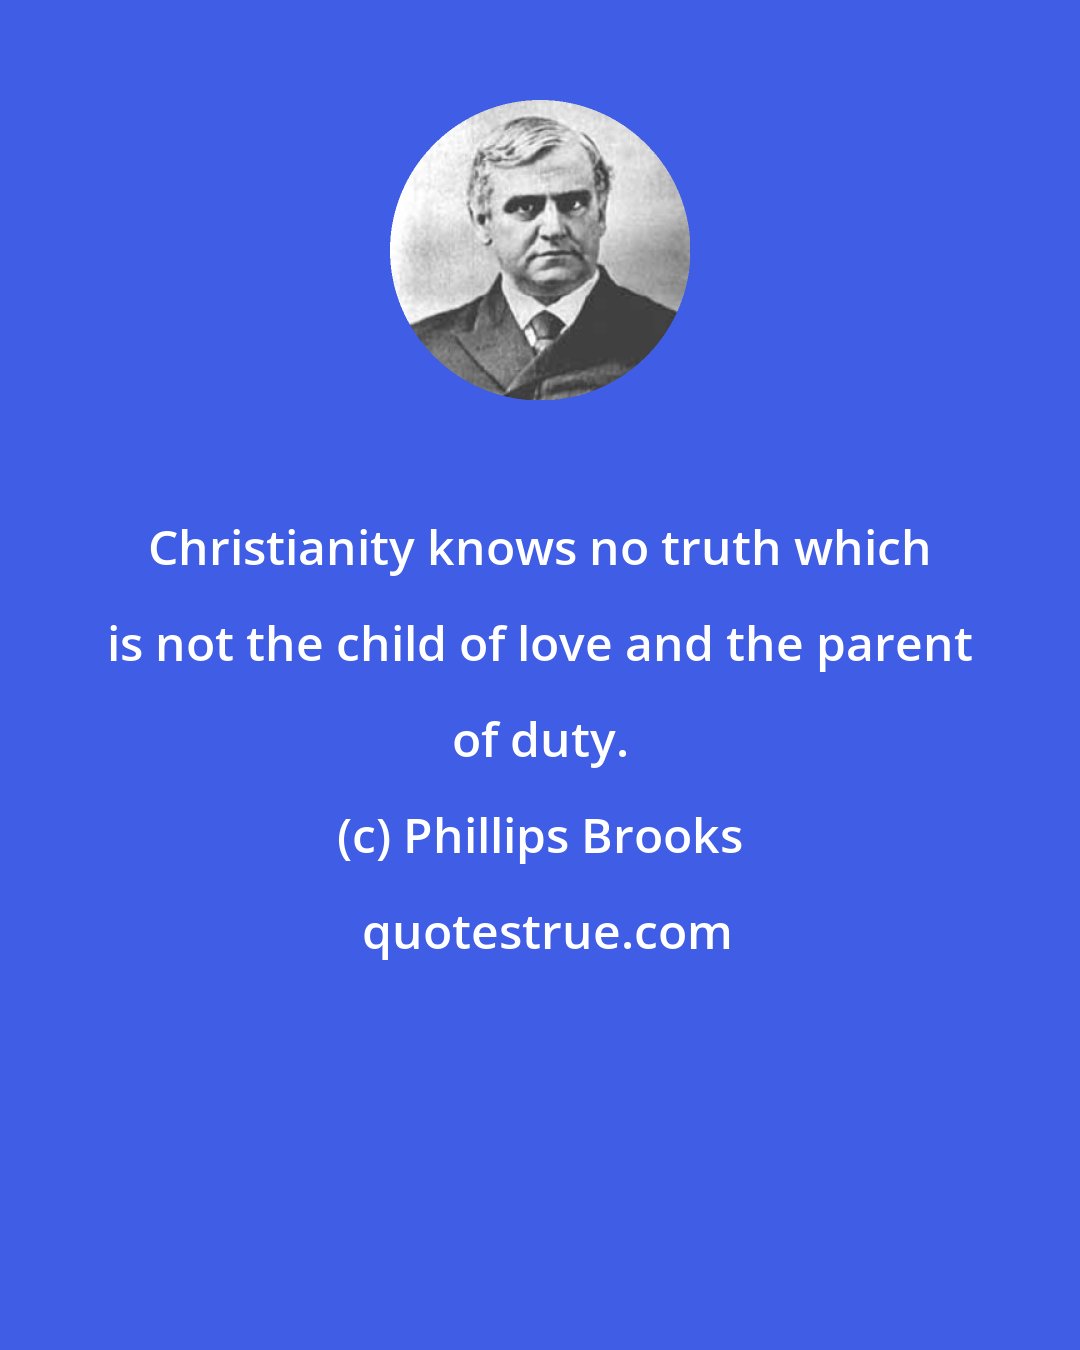 Phillips Brooks: Christianity knows no truth which is not the child of love and the parent of duty.